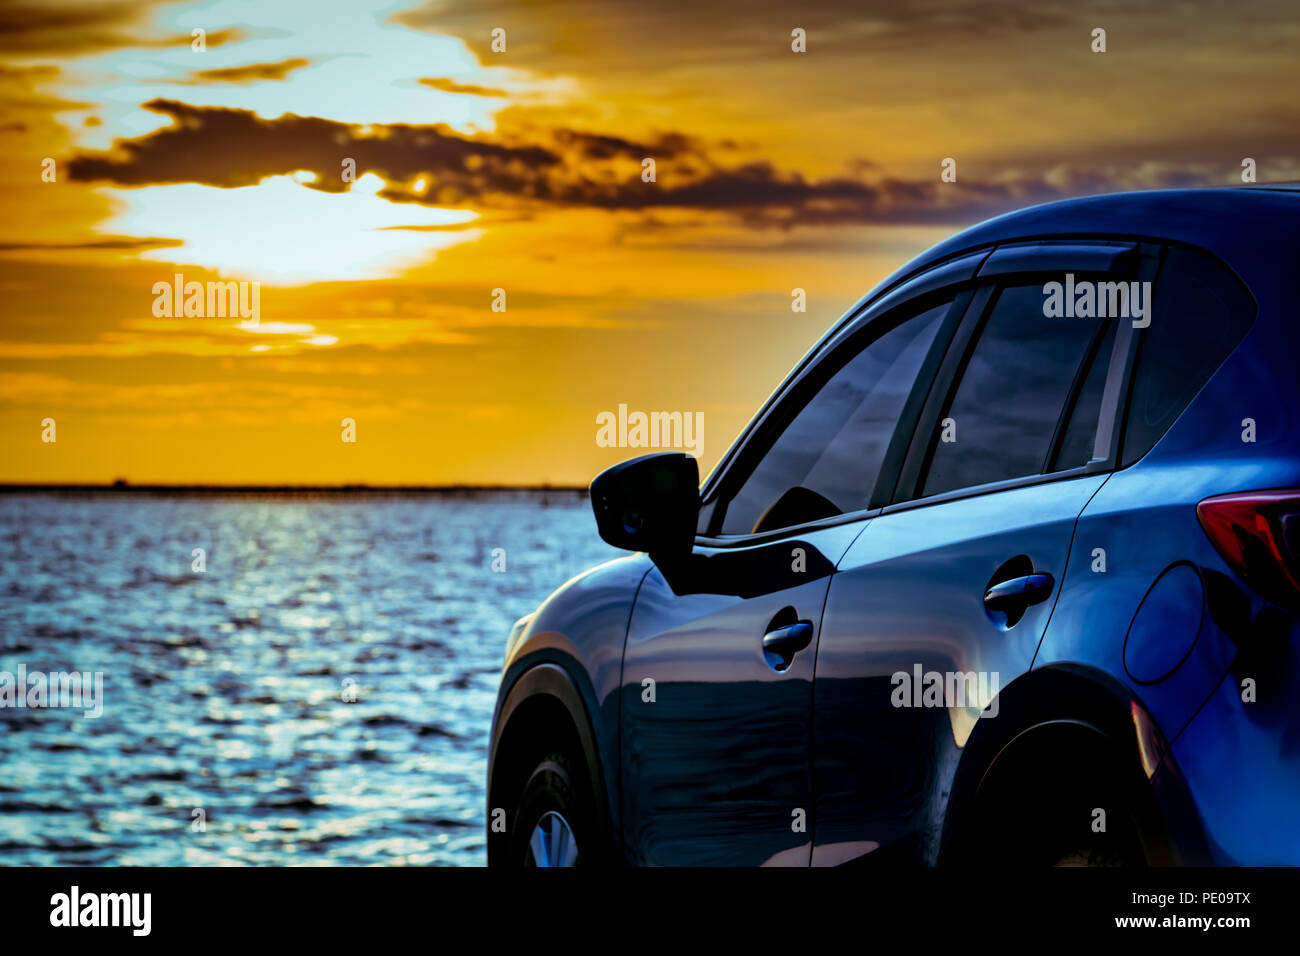 Blue compact SUV car with sport and modern design parked on concrete road by the sea at sunset. Environmentally friendly technology. Electric car tech Stock Photo